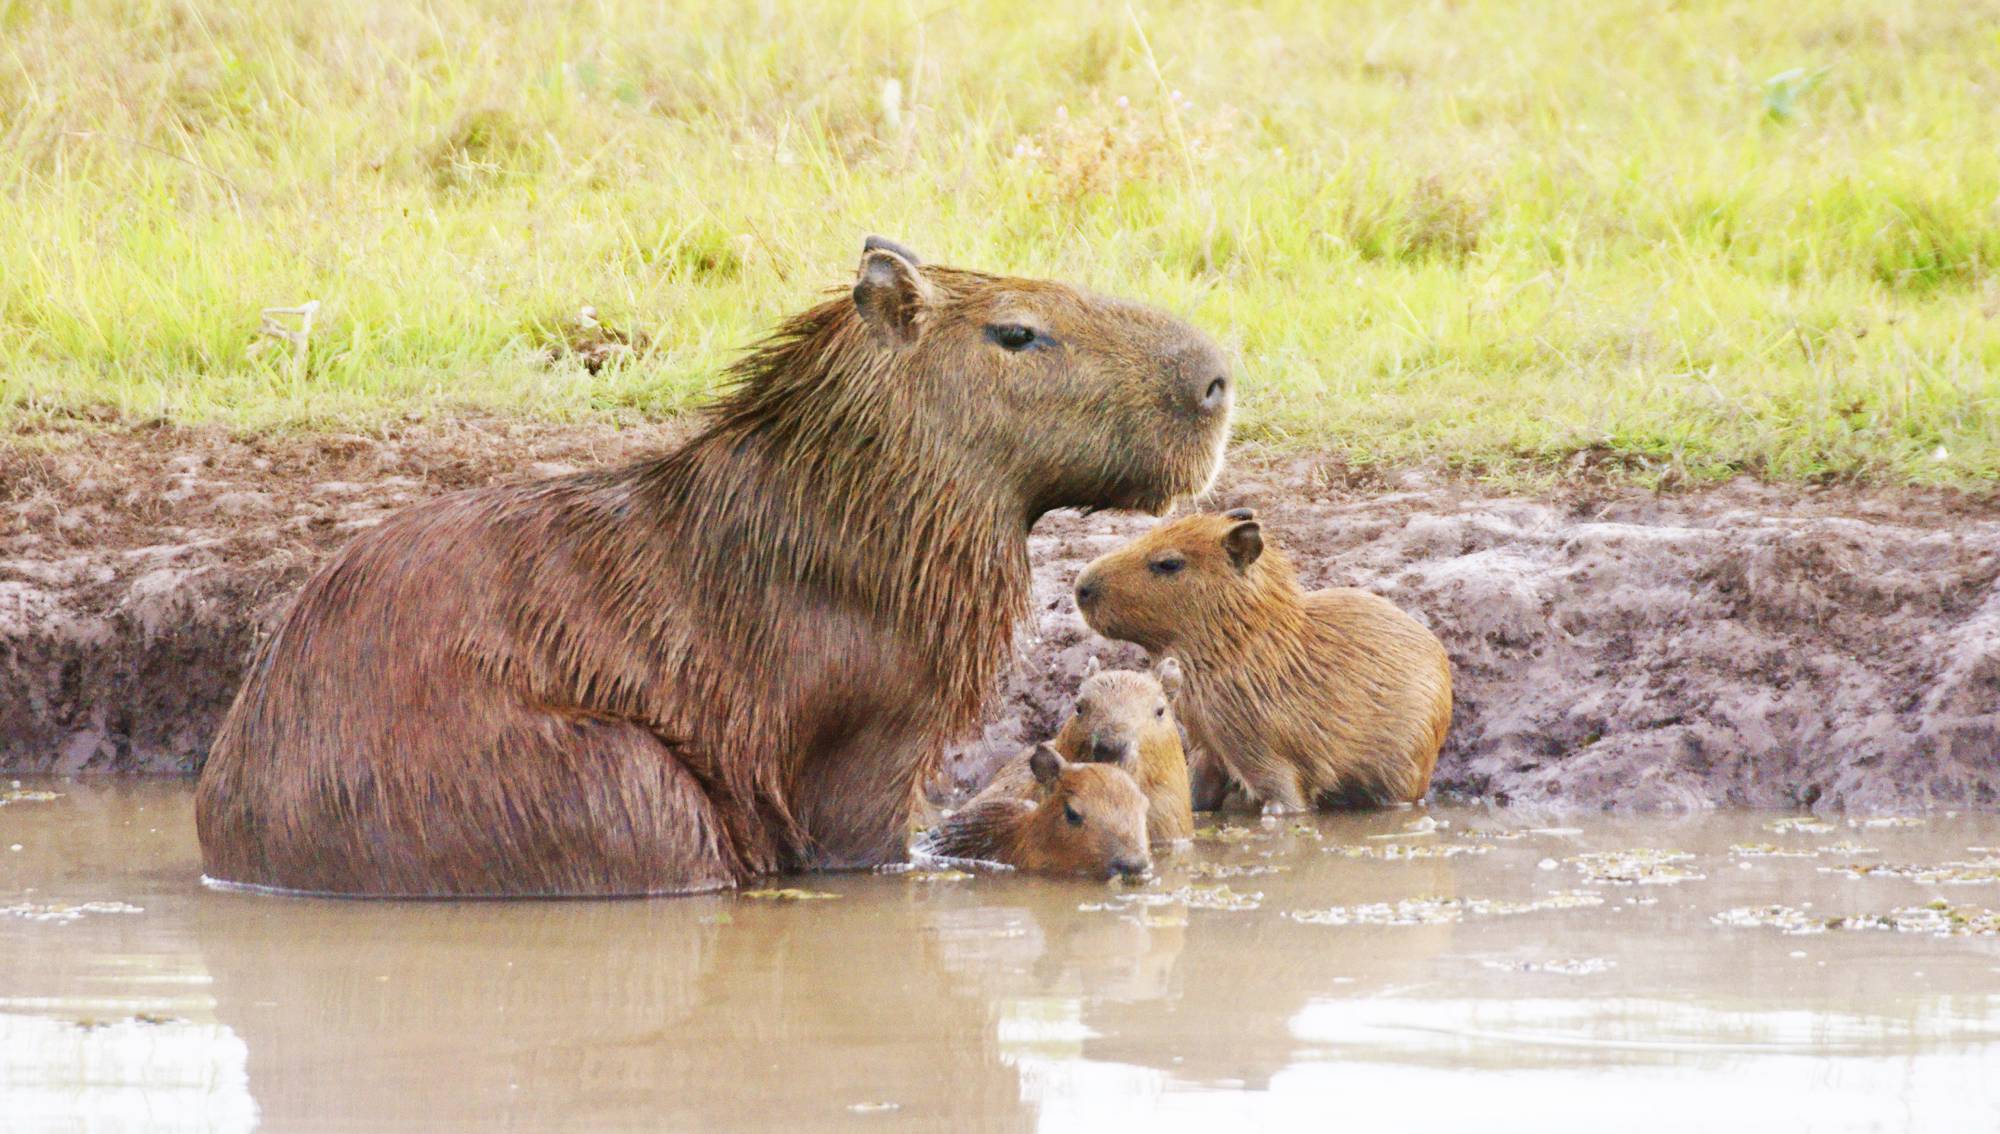 Capybara (Hydrochoerus hydrochaeris) live in habitats close to water, including marshes, estuaries, and along rivers and streams.